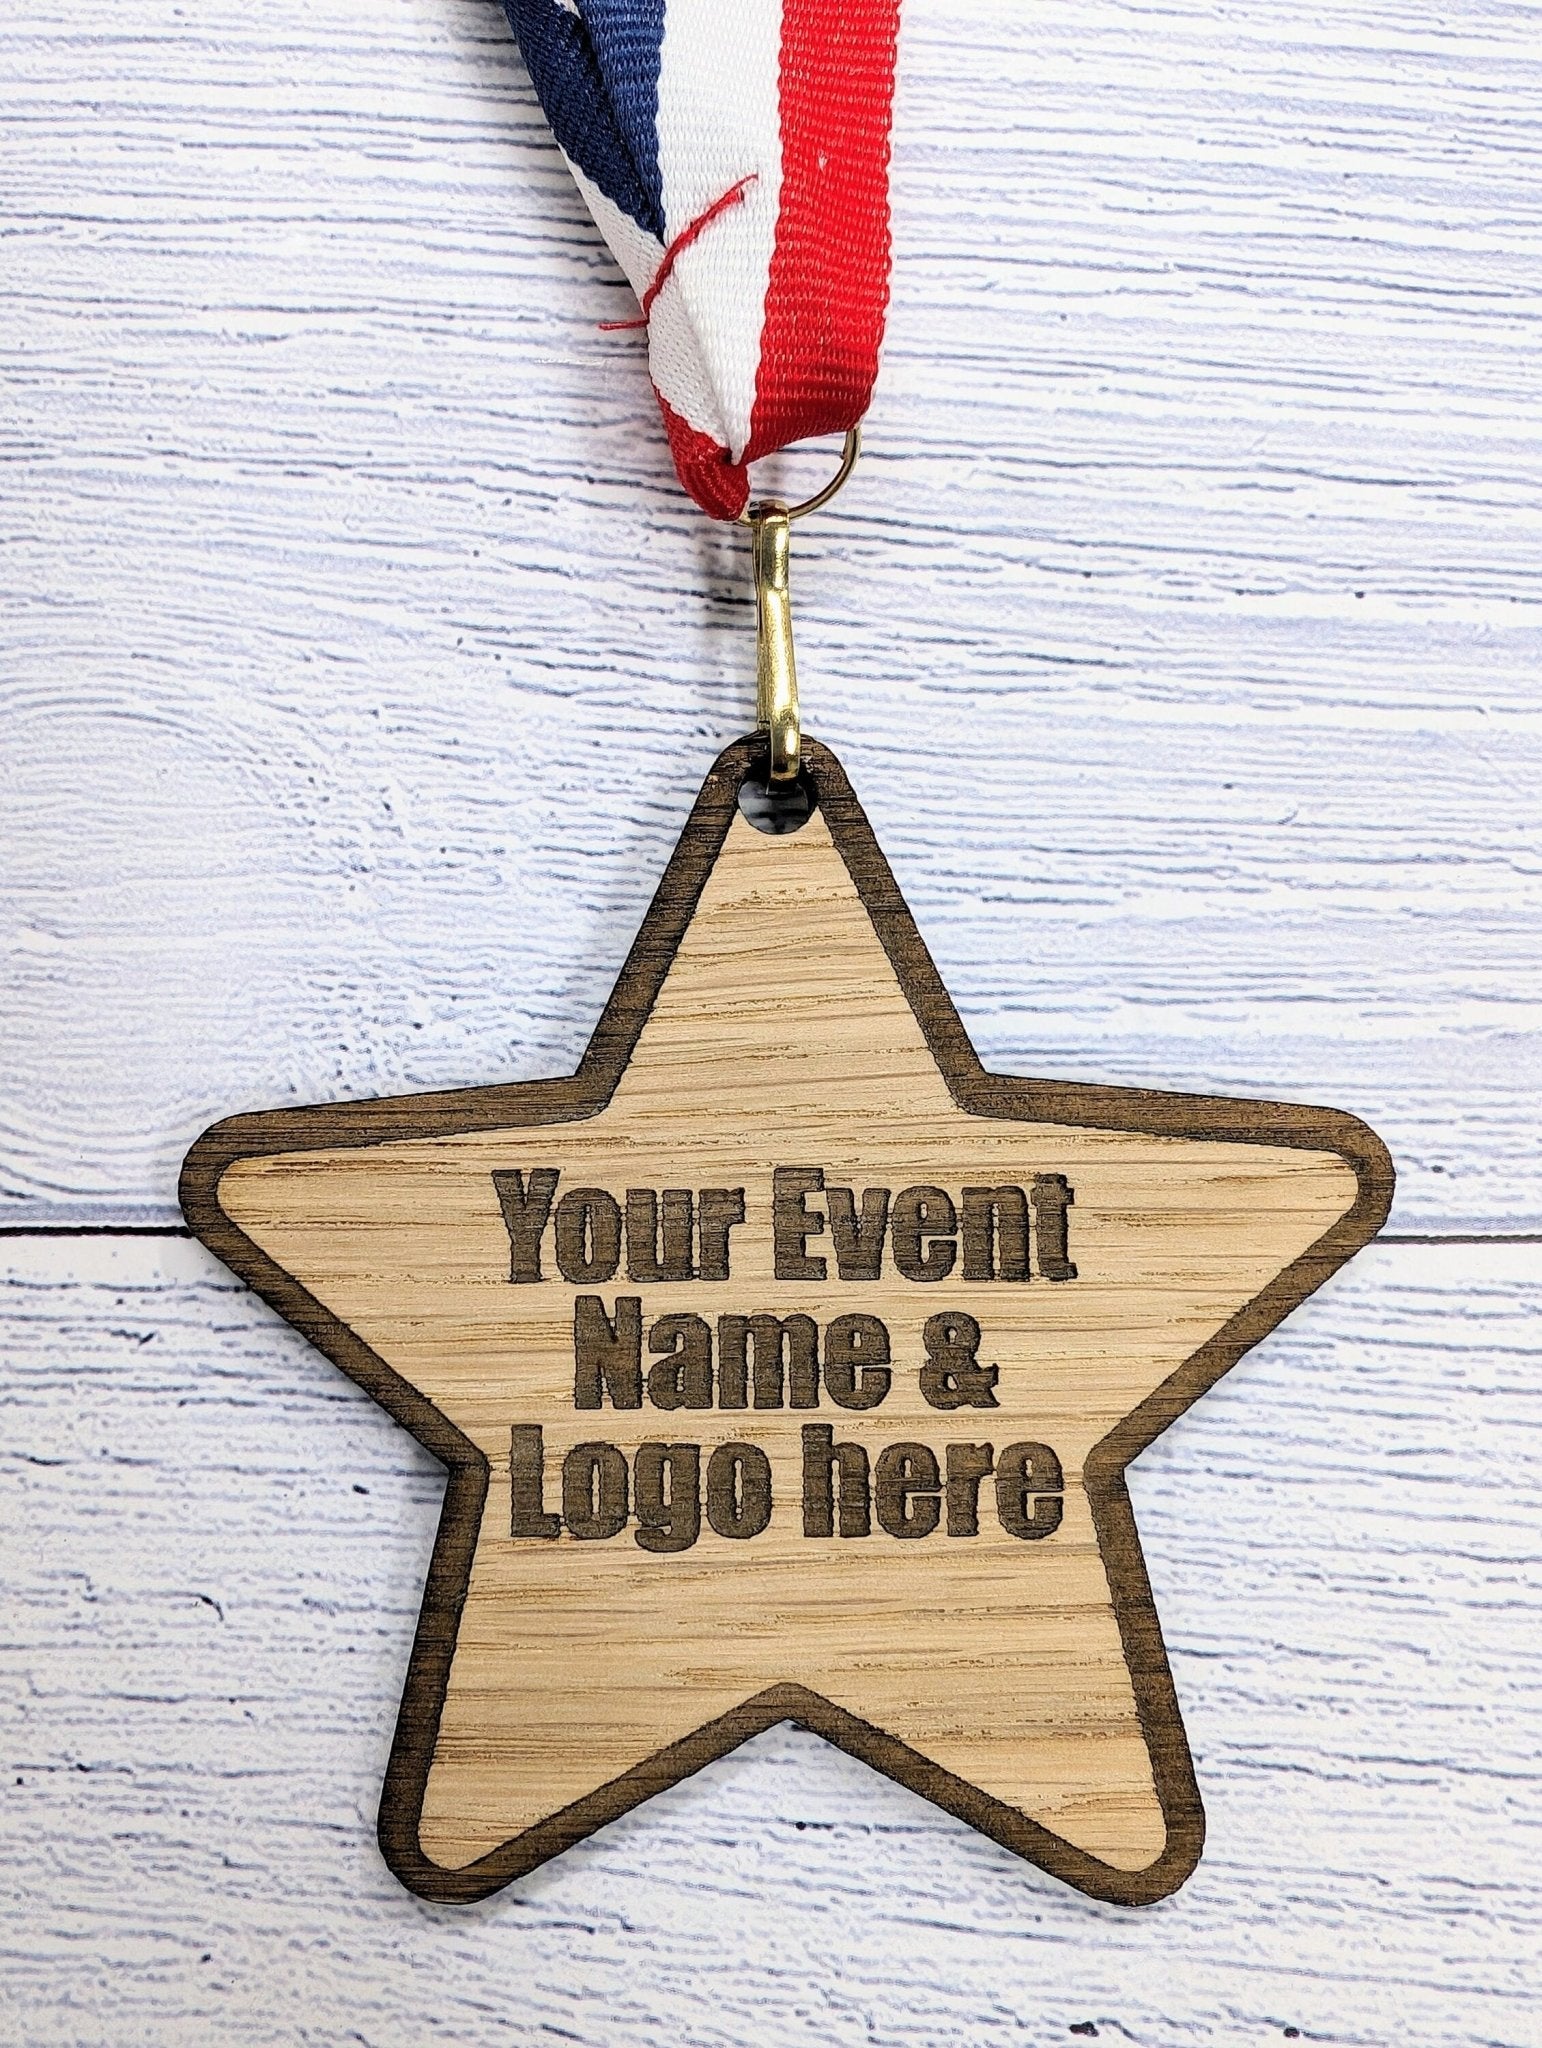 Custom Star-Shaped Wooden Medals - Personalised for Events & Organisations | Bulk Discounts, Participation Awards, Handcrafted - CherryGroveCraft